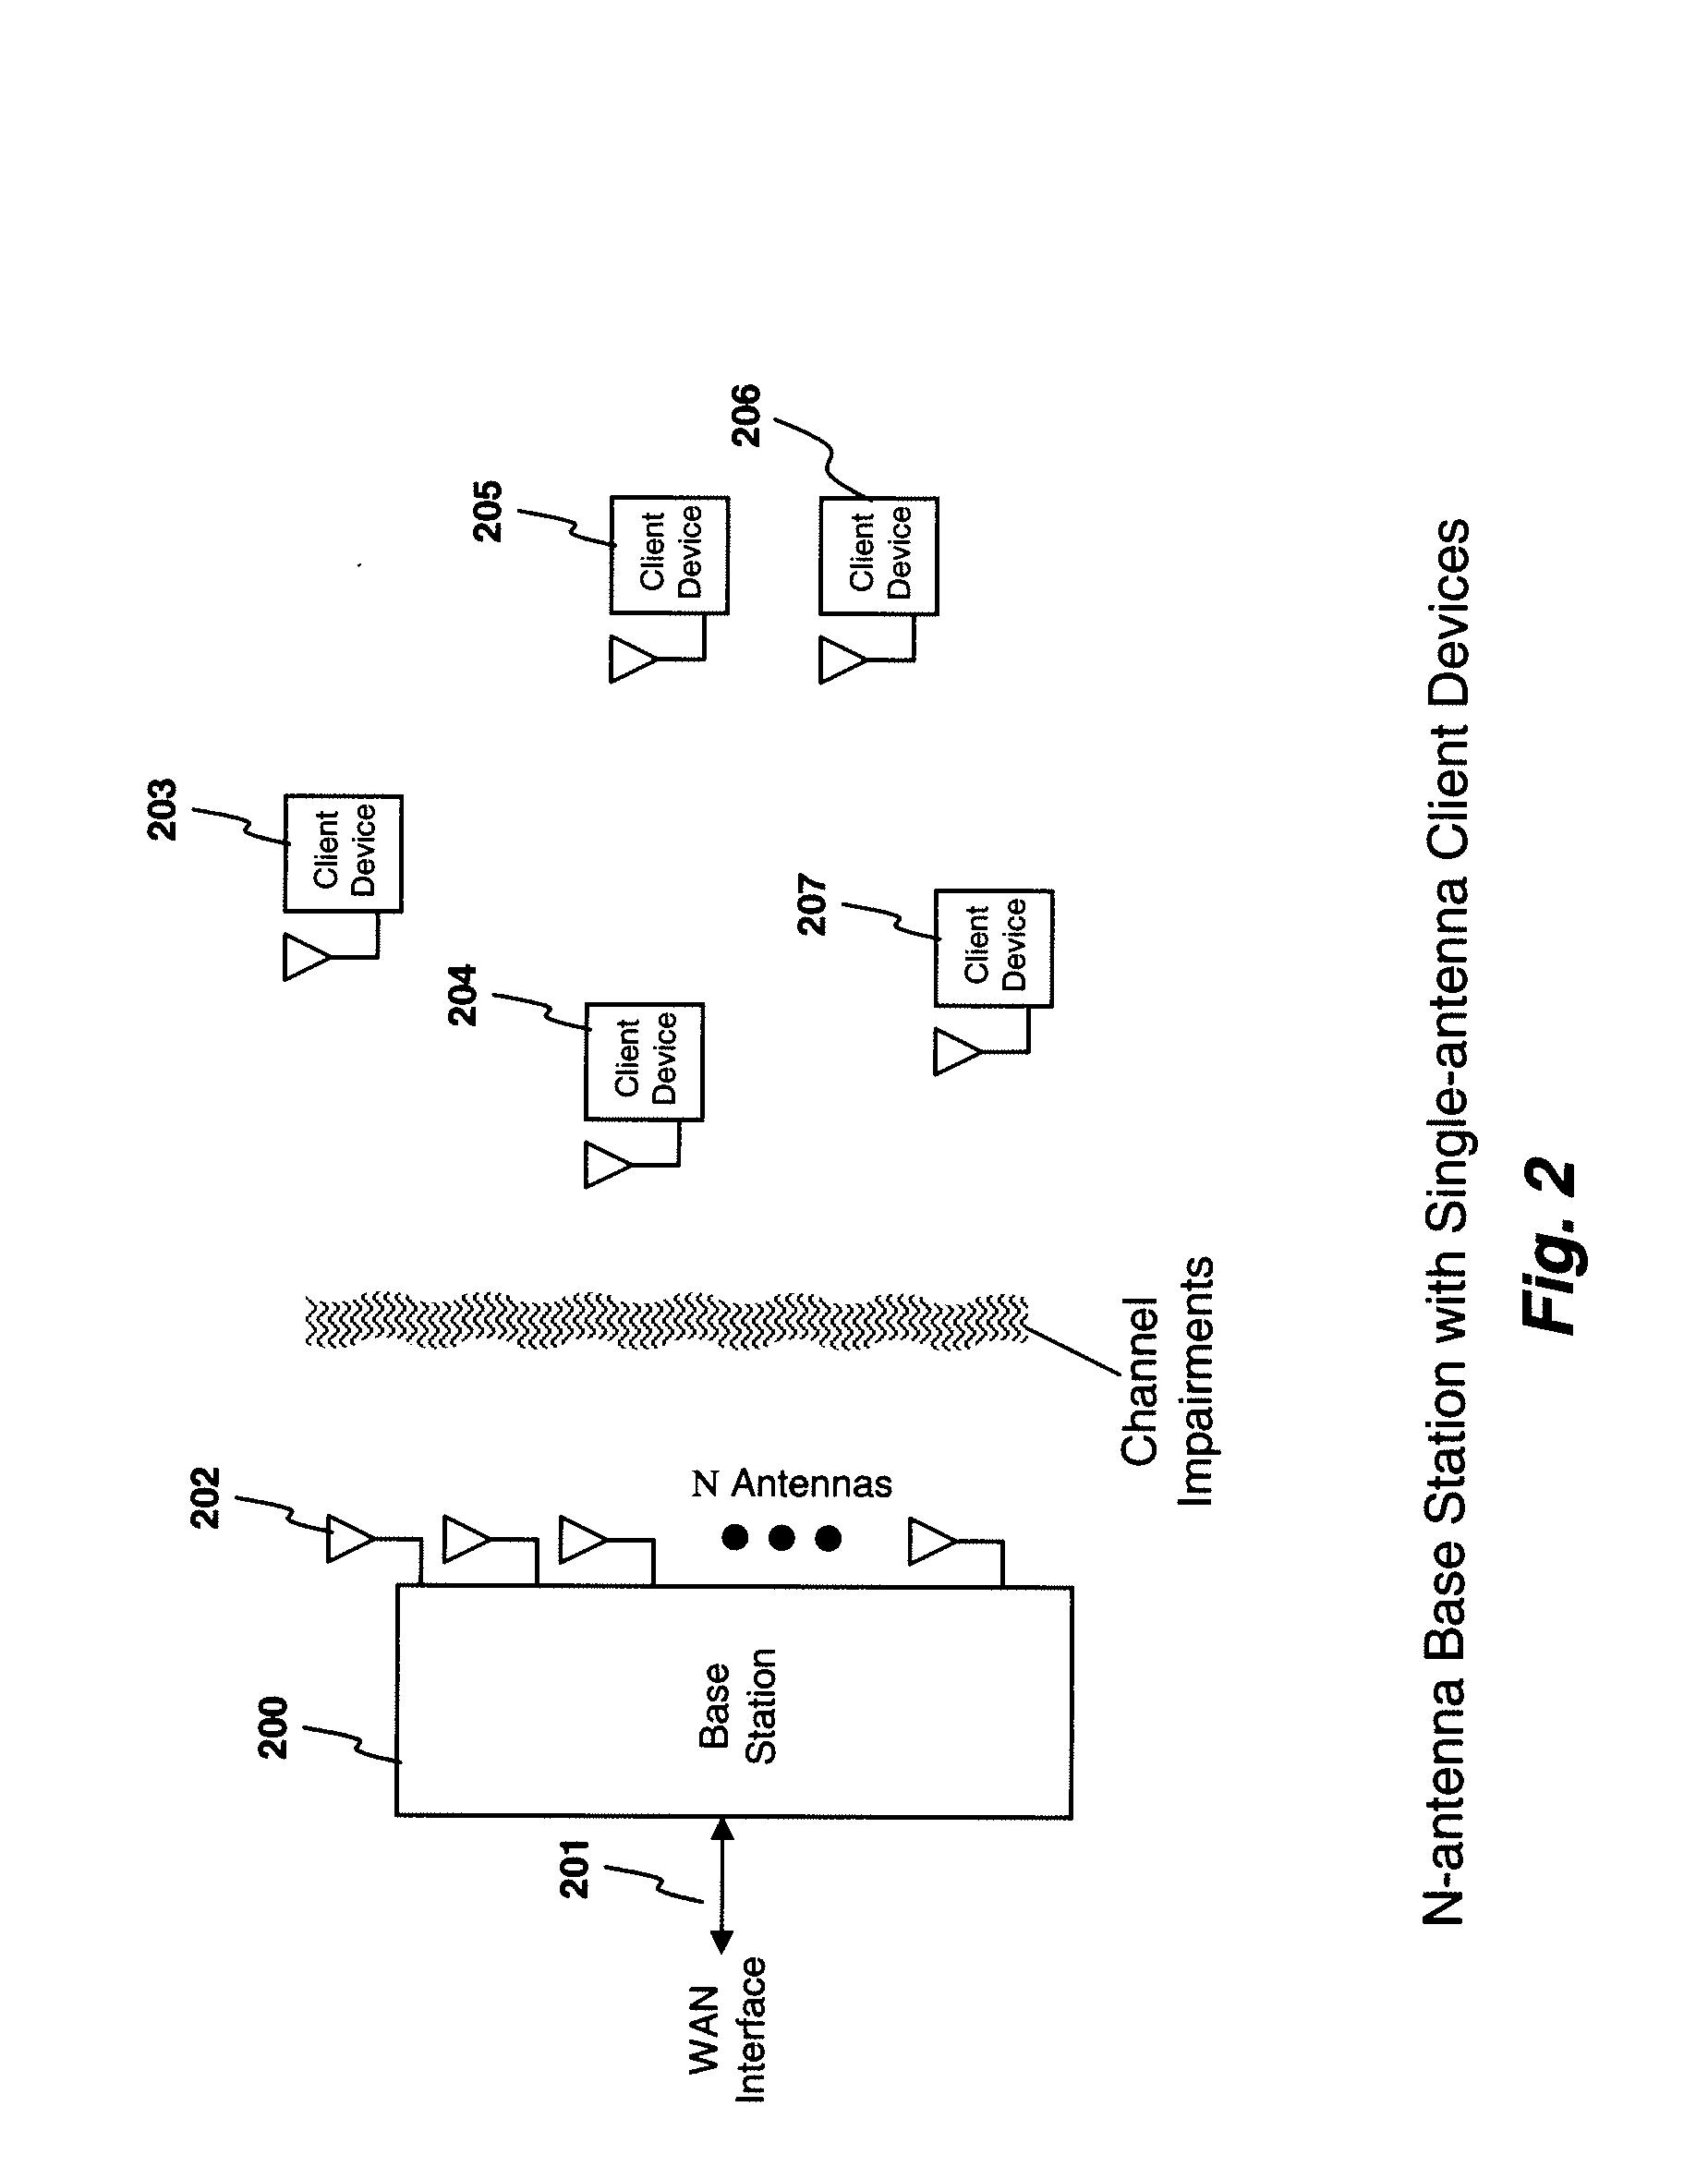 System and Method For Distributed Input-Distributed Output Wireless Communications